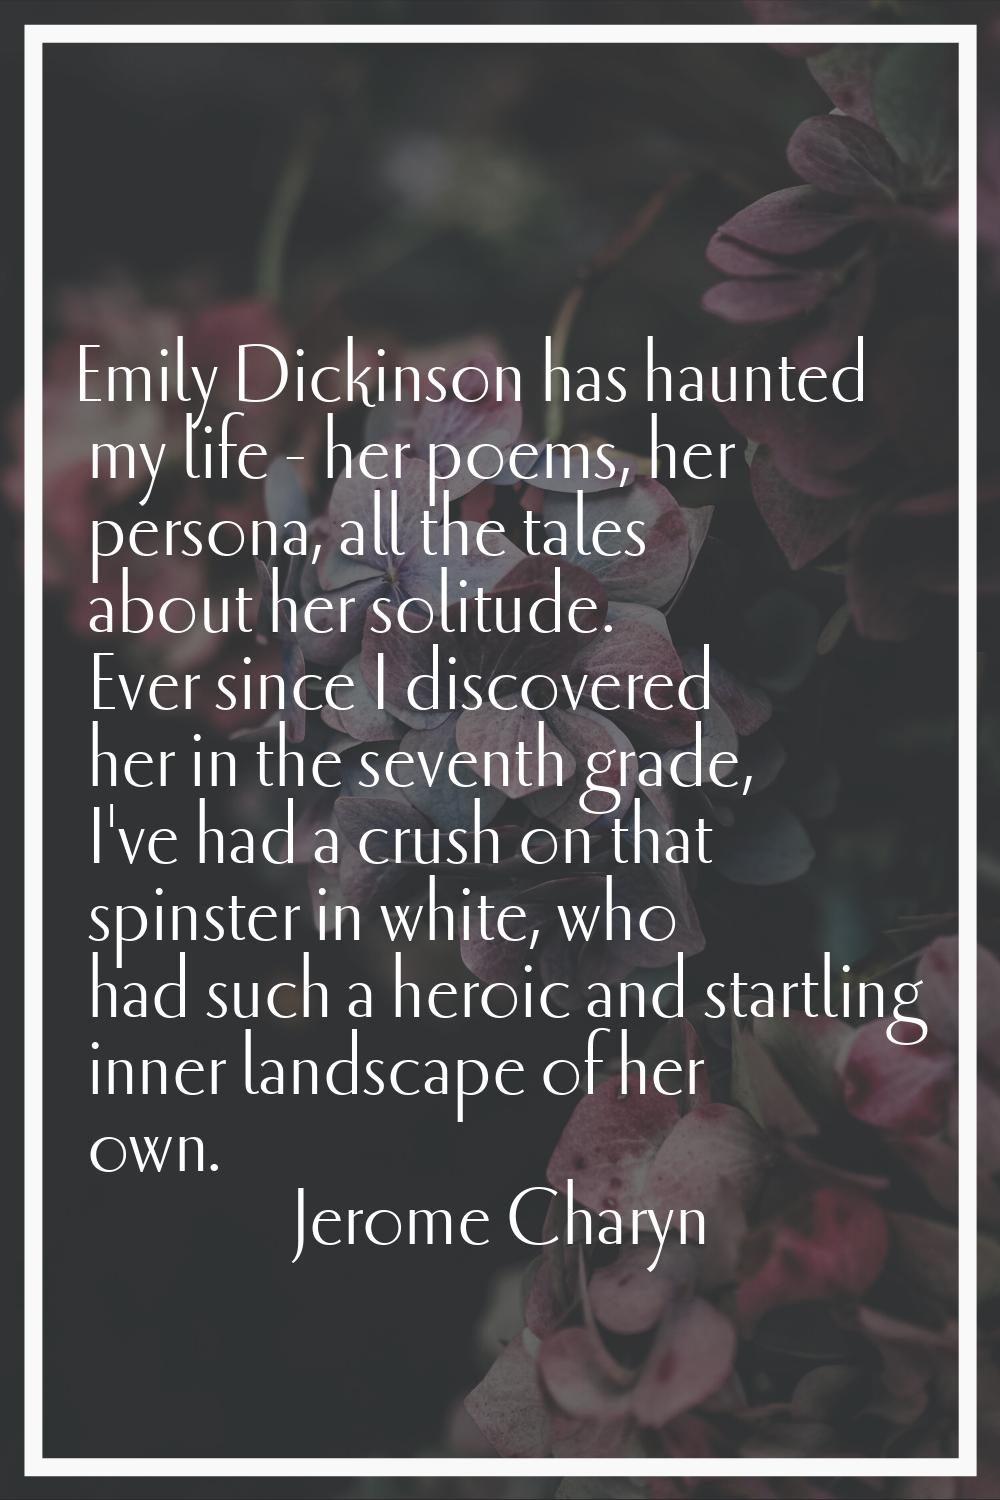 Emily Dickinson has haunted my life - her poems, her persona, all the tales about her solitude. Eve